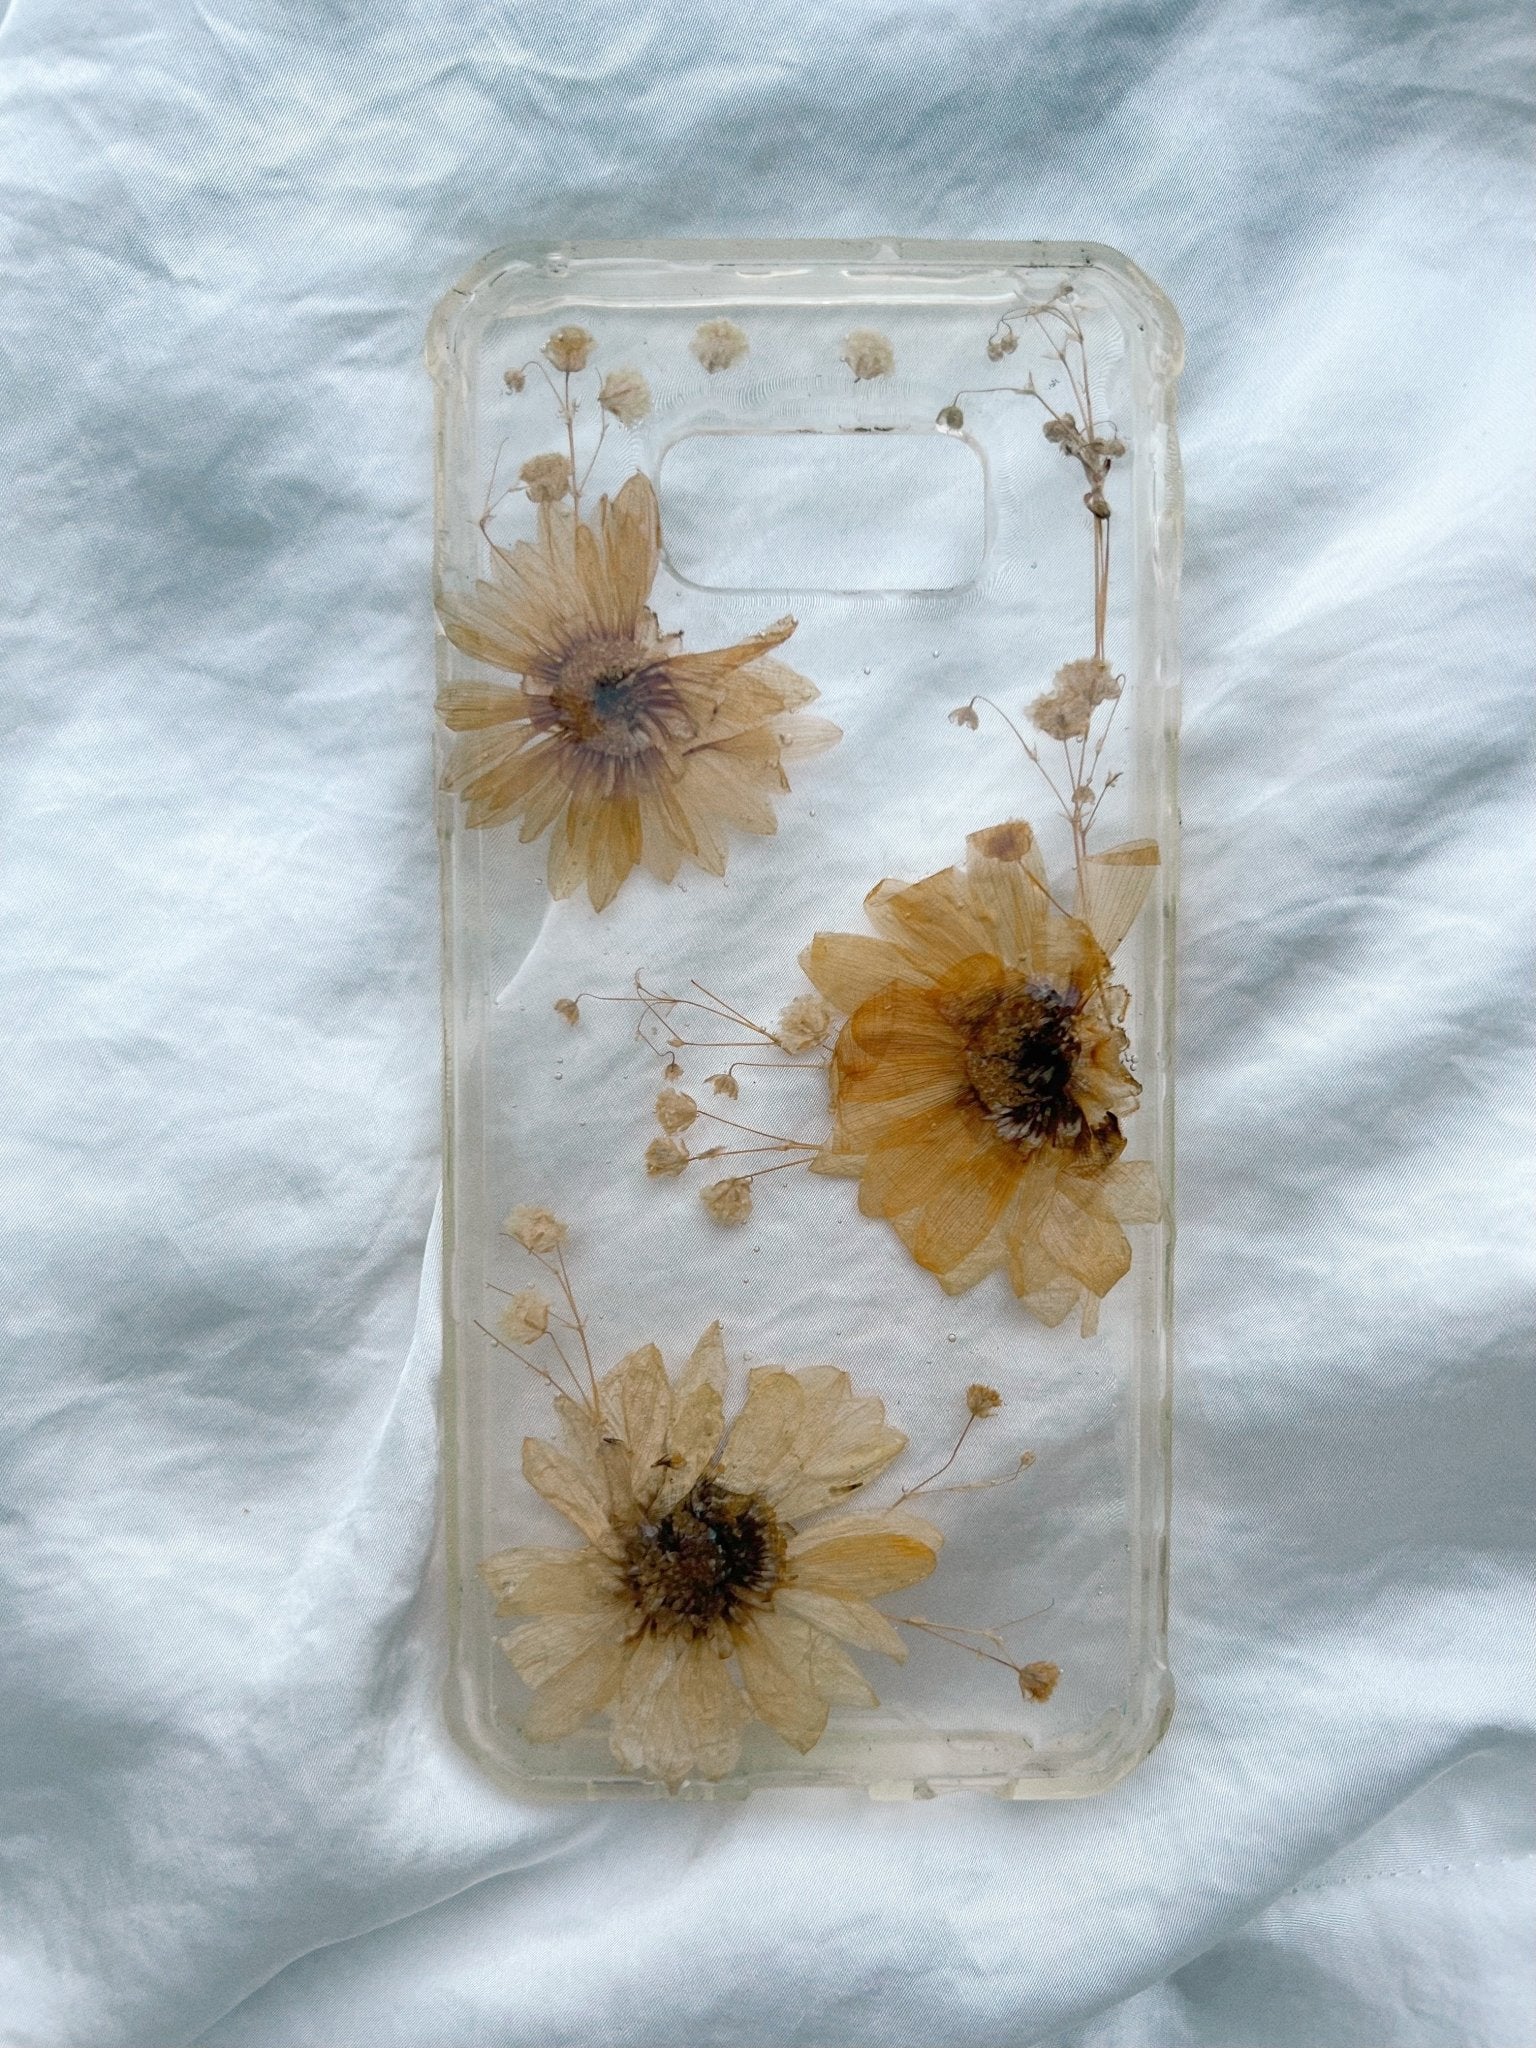 Sunny S8+ - Oldleafdesigns pressed flower phone case, botanical phone case, pressed flower art, handmade phone case, real pressed flowers, australian made, botanical art, pressed flower artist, floral art, botanical preservation, resin and flowers, flowers in resin, phone accessories, samsung s8 phone case, samsung case